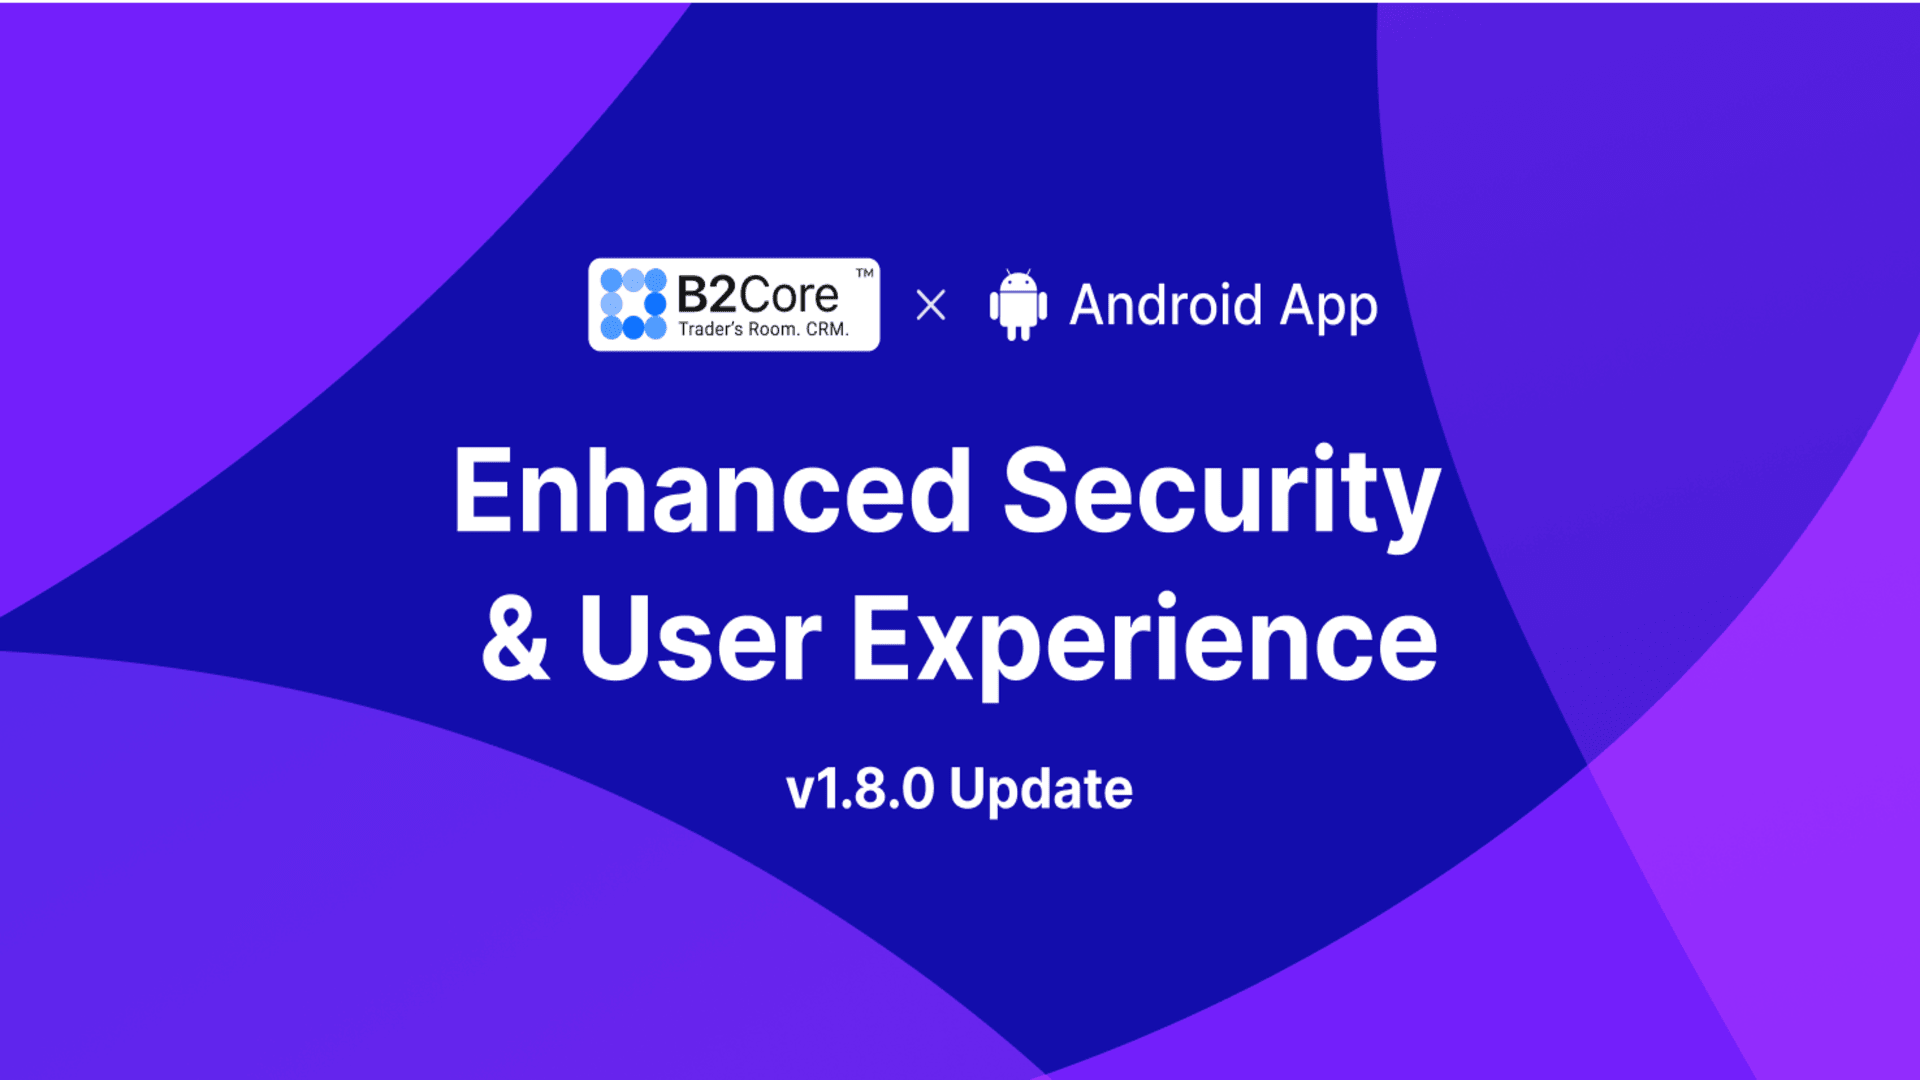 B2Core Upgrades Its Android App for Enhanced Security and Better User Experience